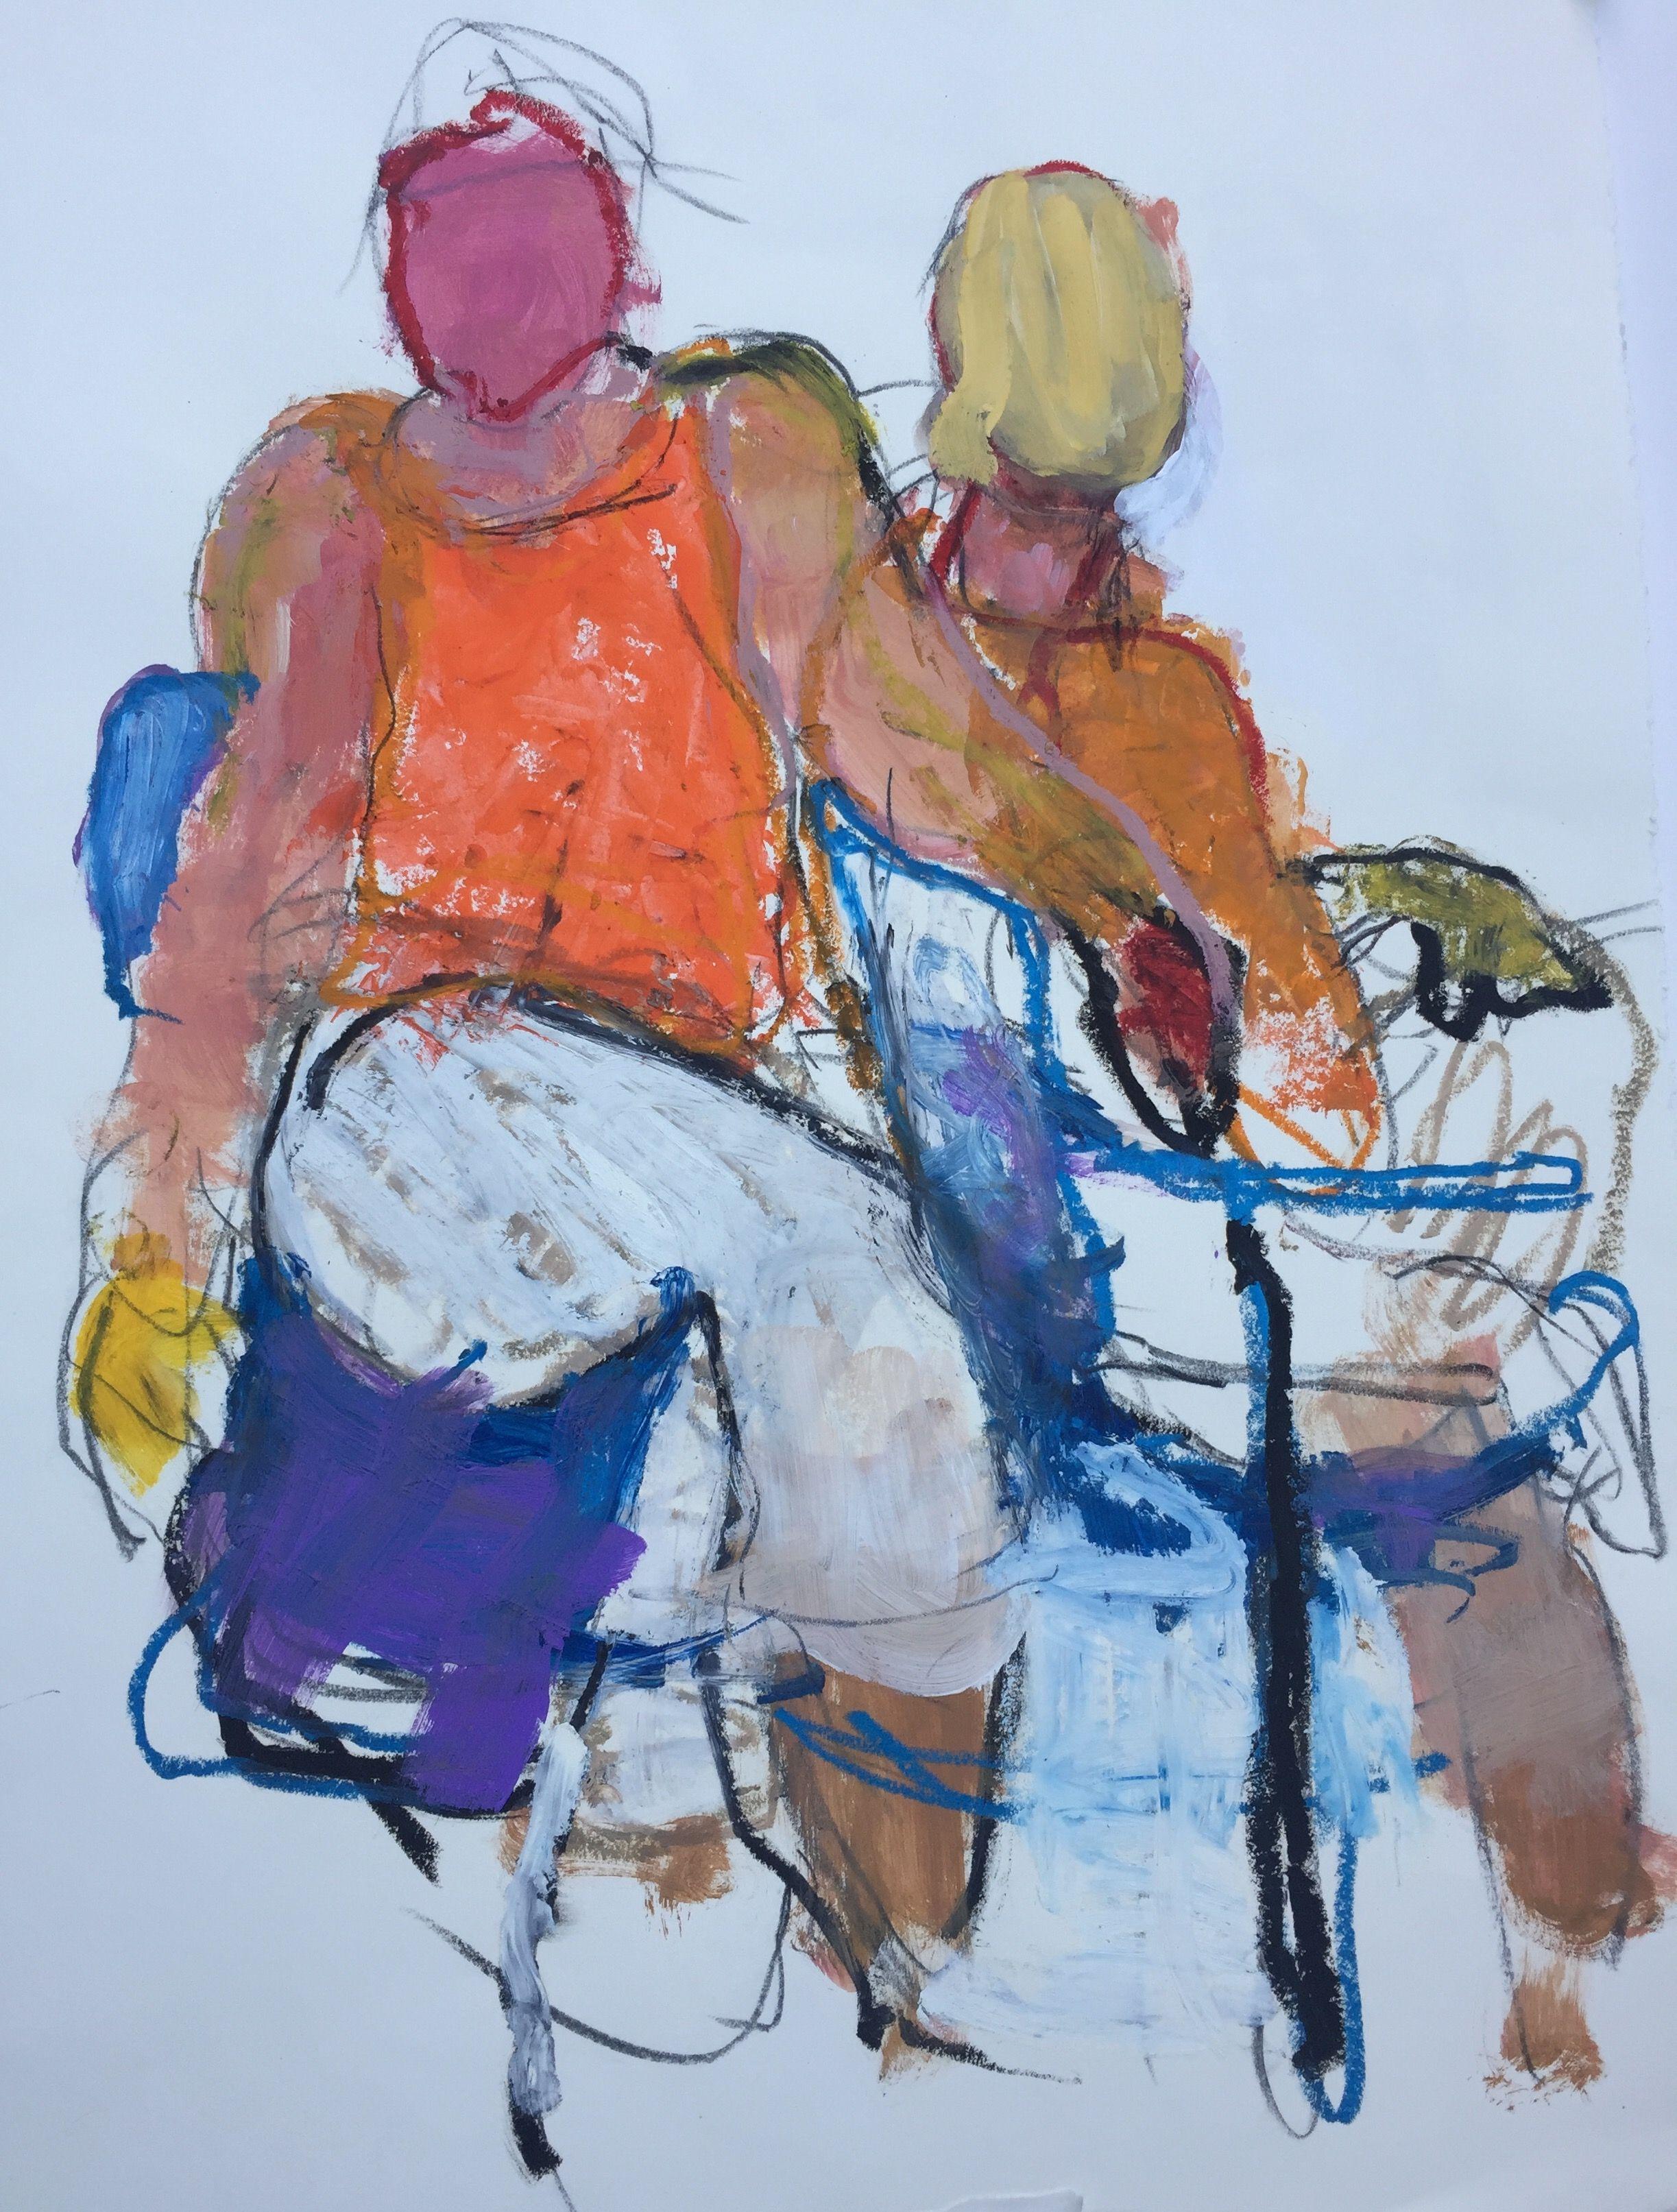 We Sat, Mixed Media on Paper - Mixed Media Art by Lynne Pell